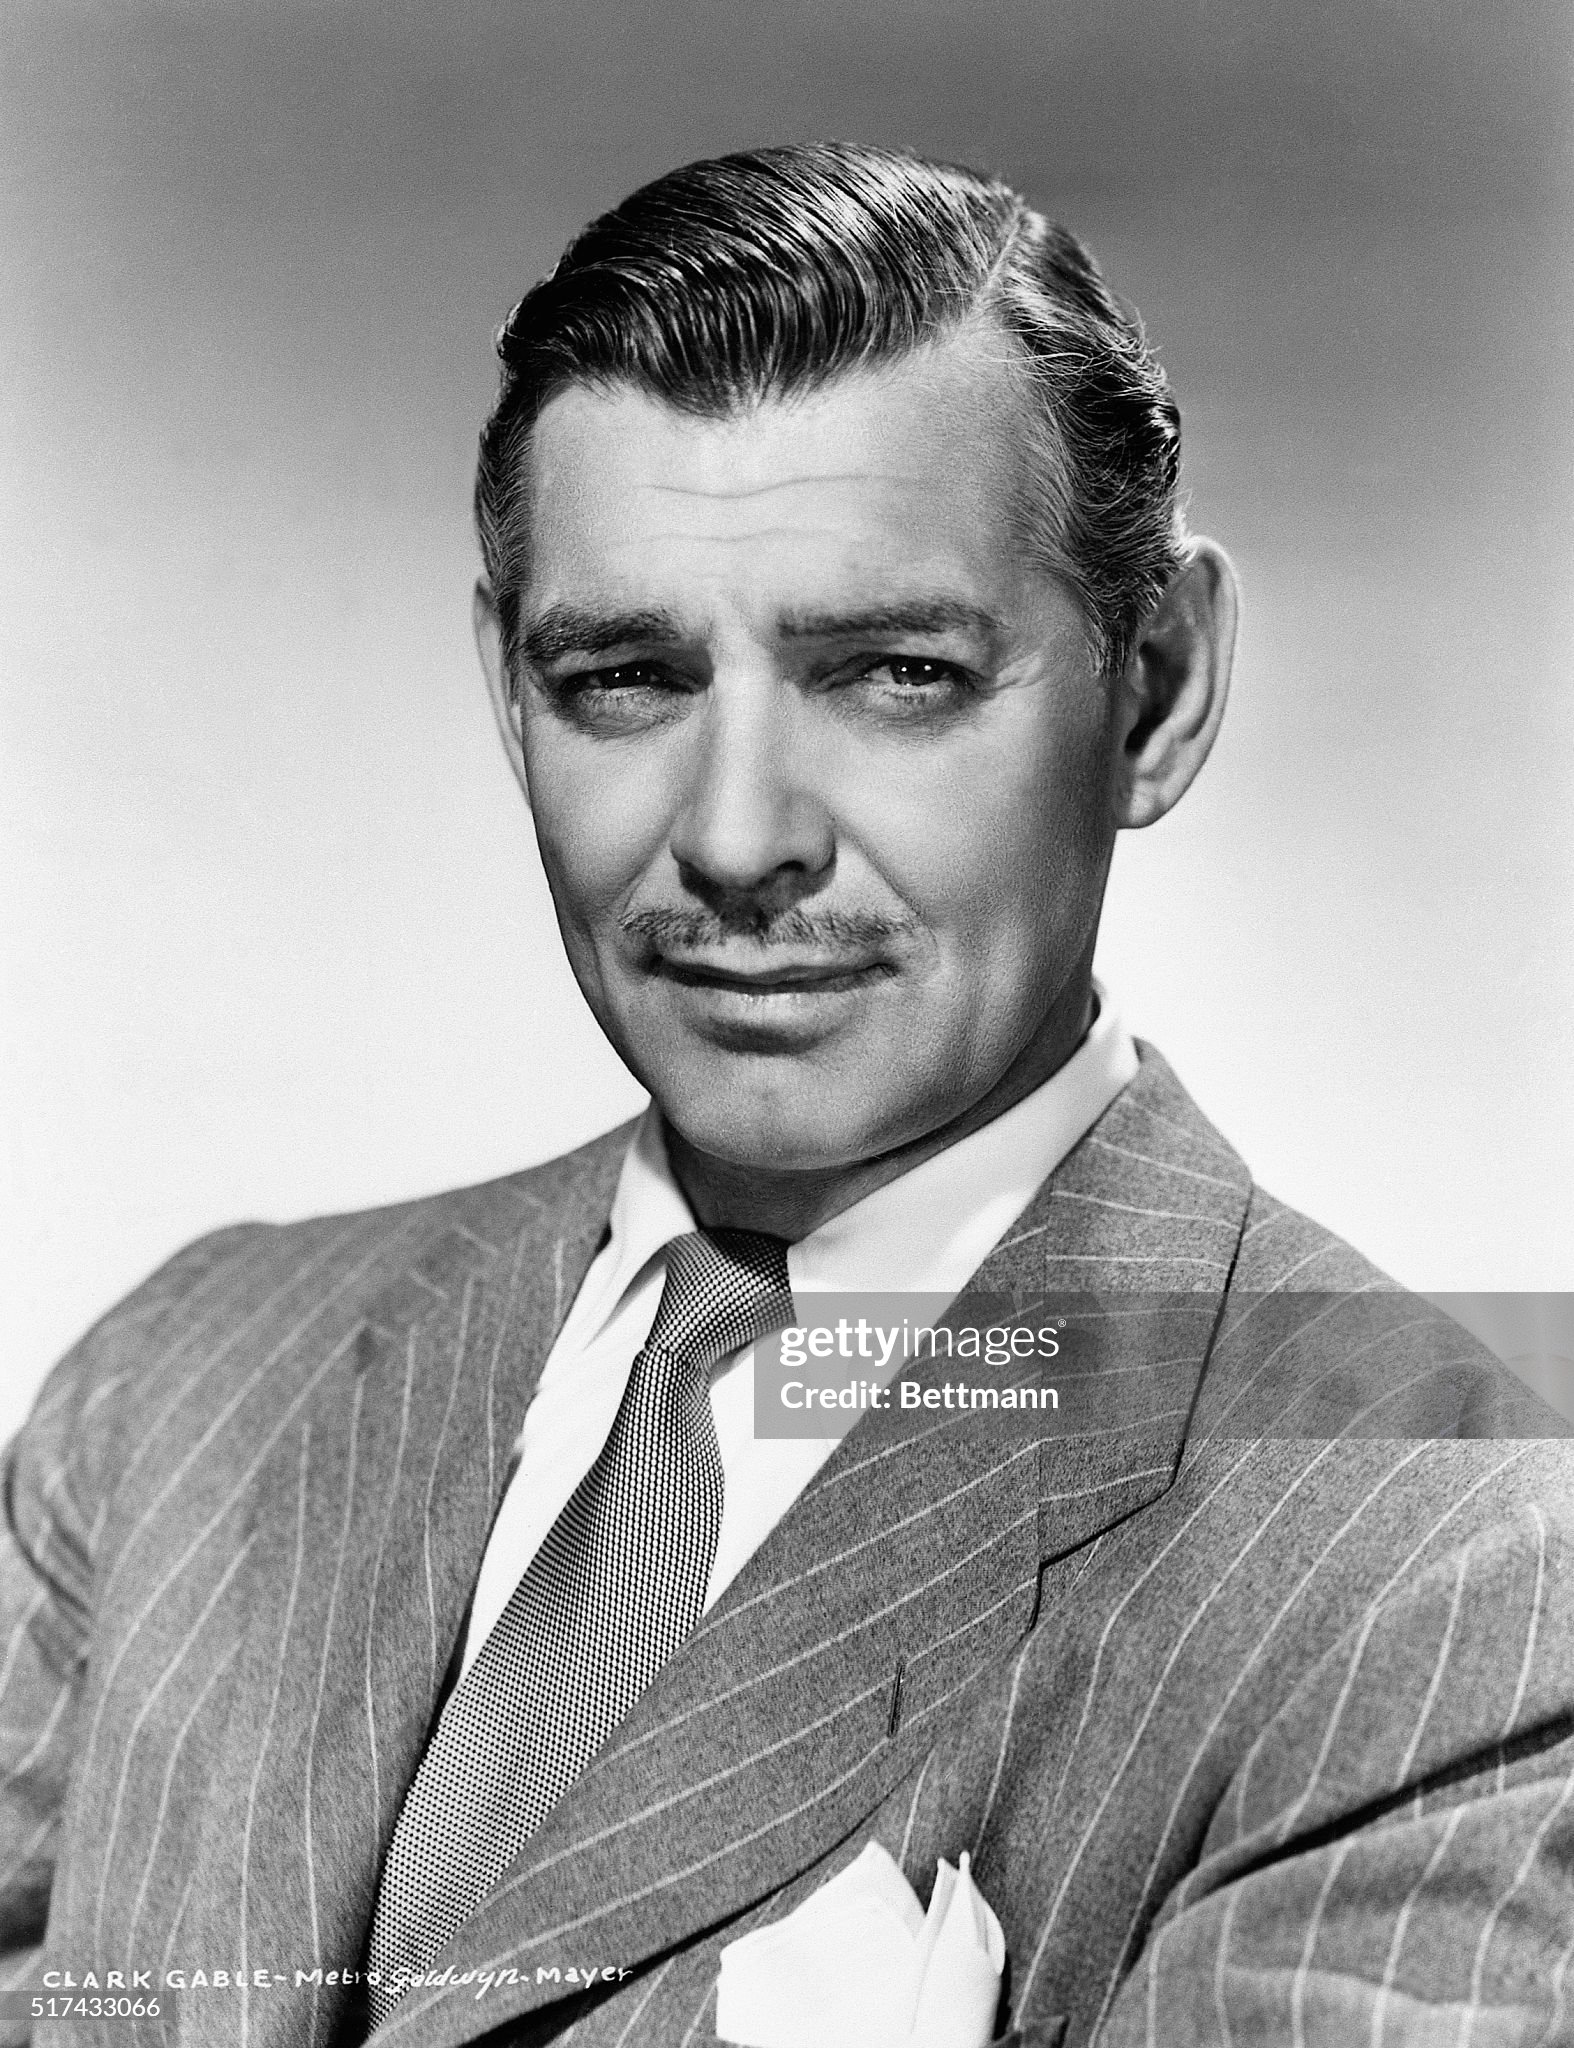 ¿Cuánto mide Clark Gable? - Altura - Real height A-portrait-of-screen-actor-clark-gable-mgm-star-filed-6-15-1946